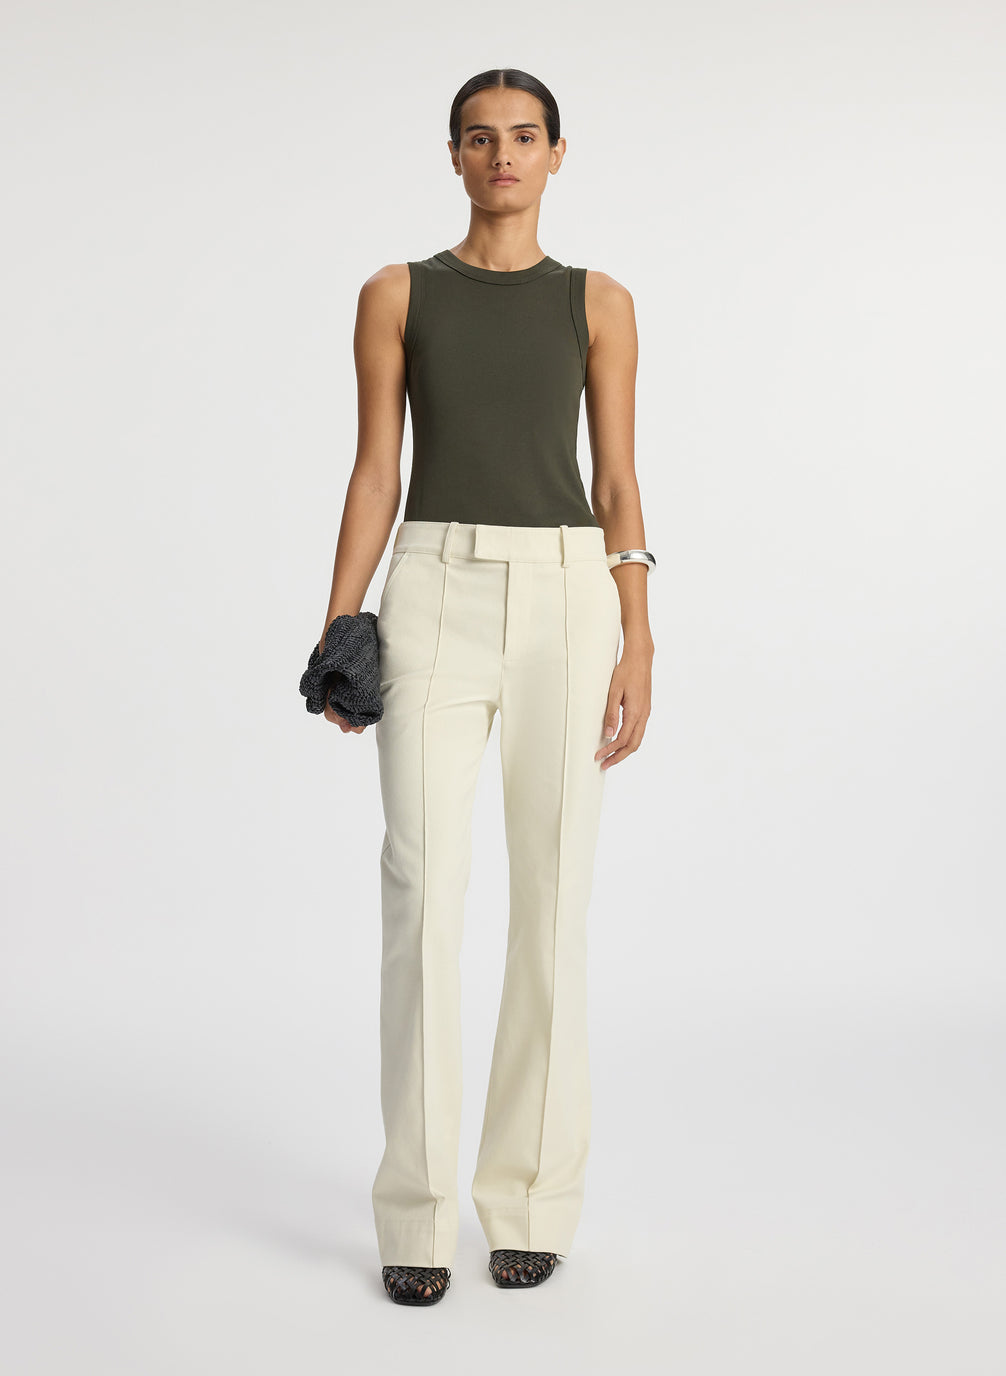 front view of woman wearing olive green sleeveless top with cream wide leg pants